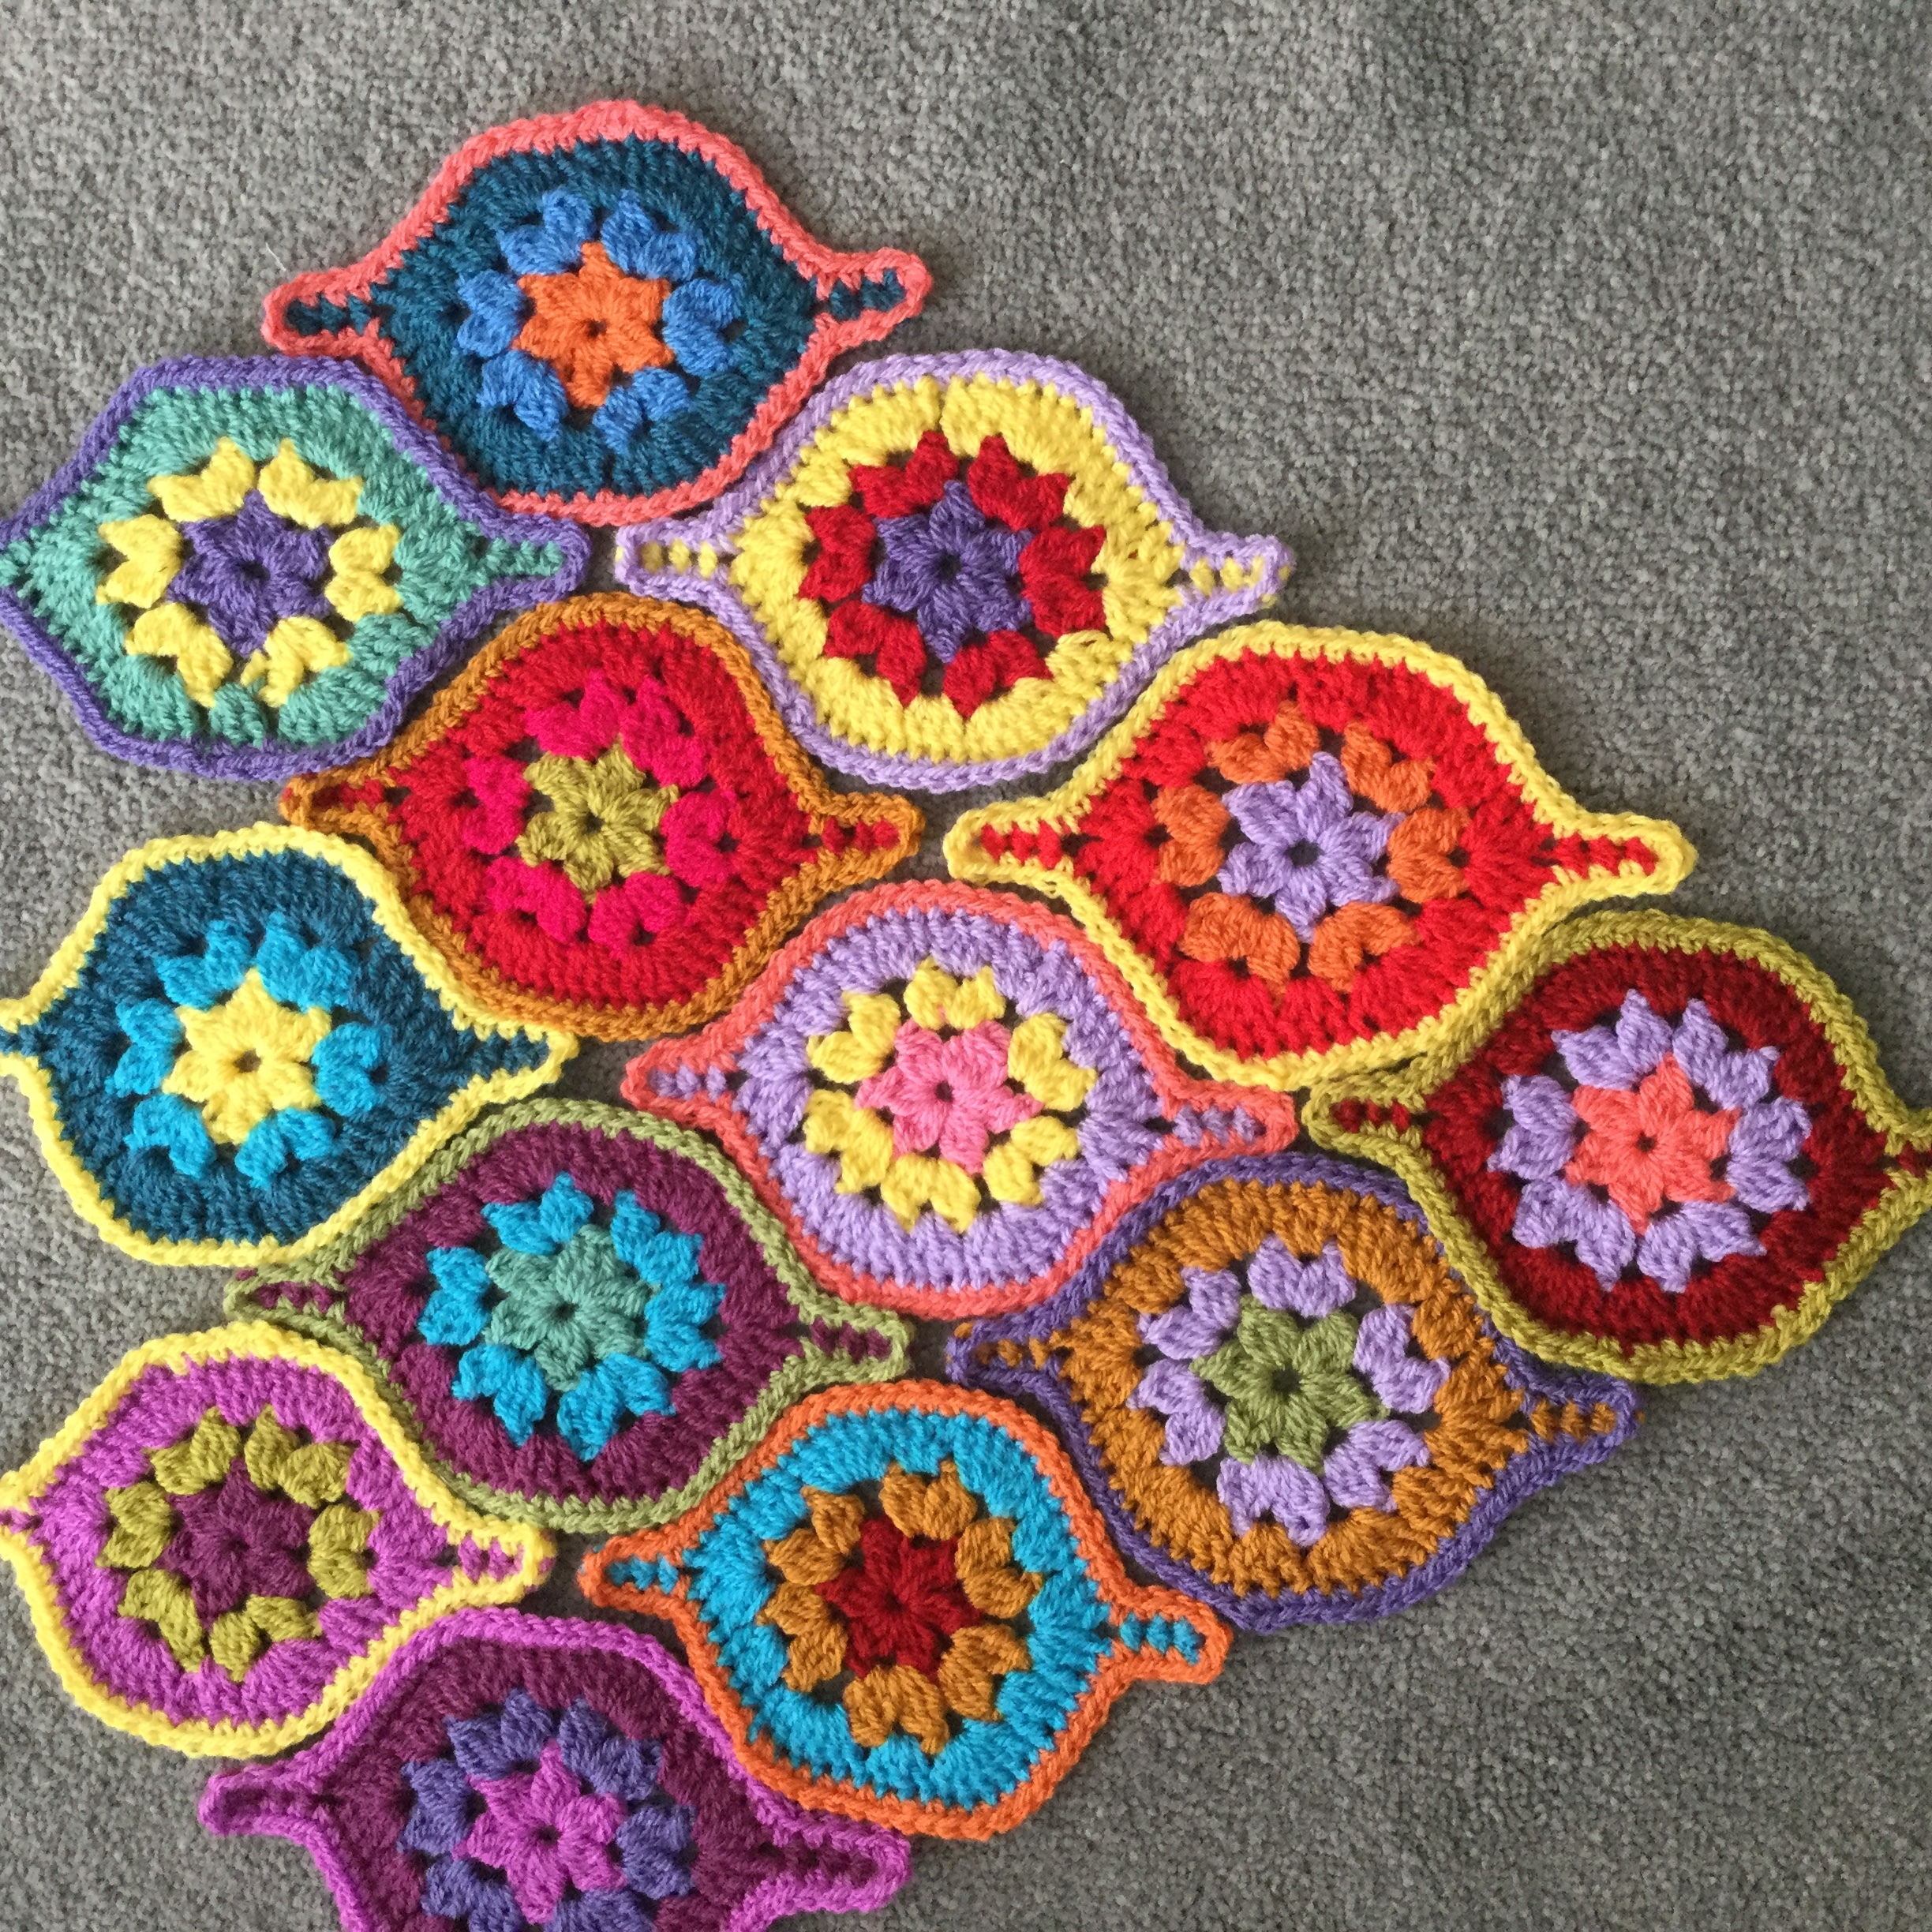 Moroccan tile style blanket crochet project by Knitting & Crochet Crazy